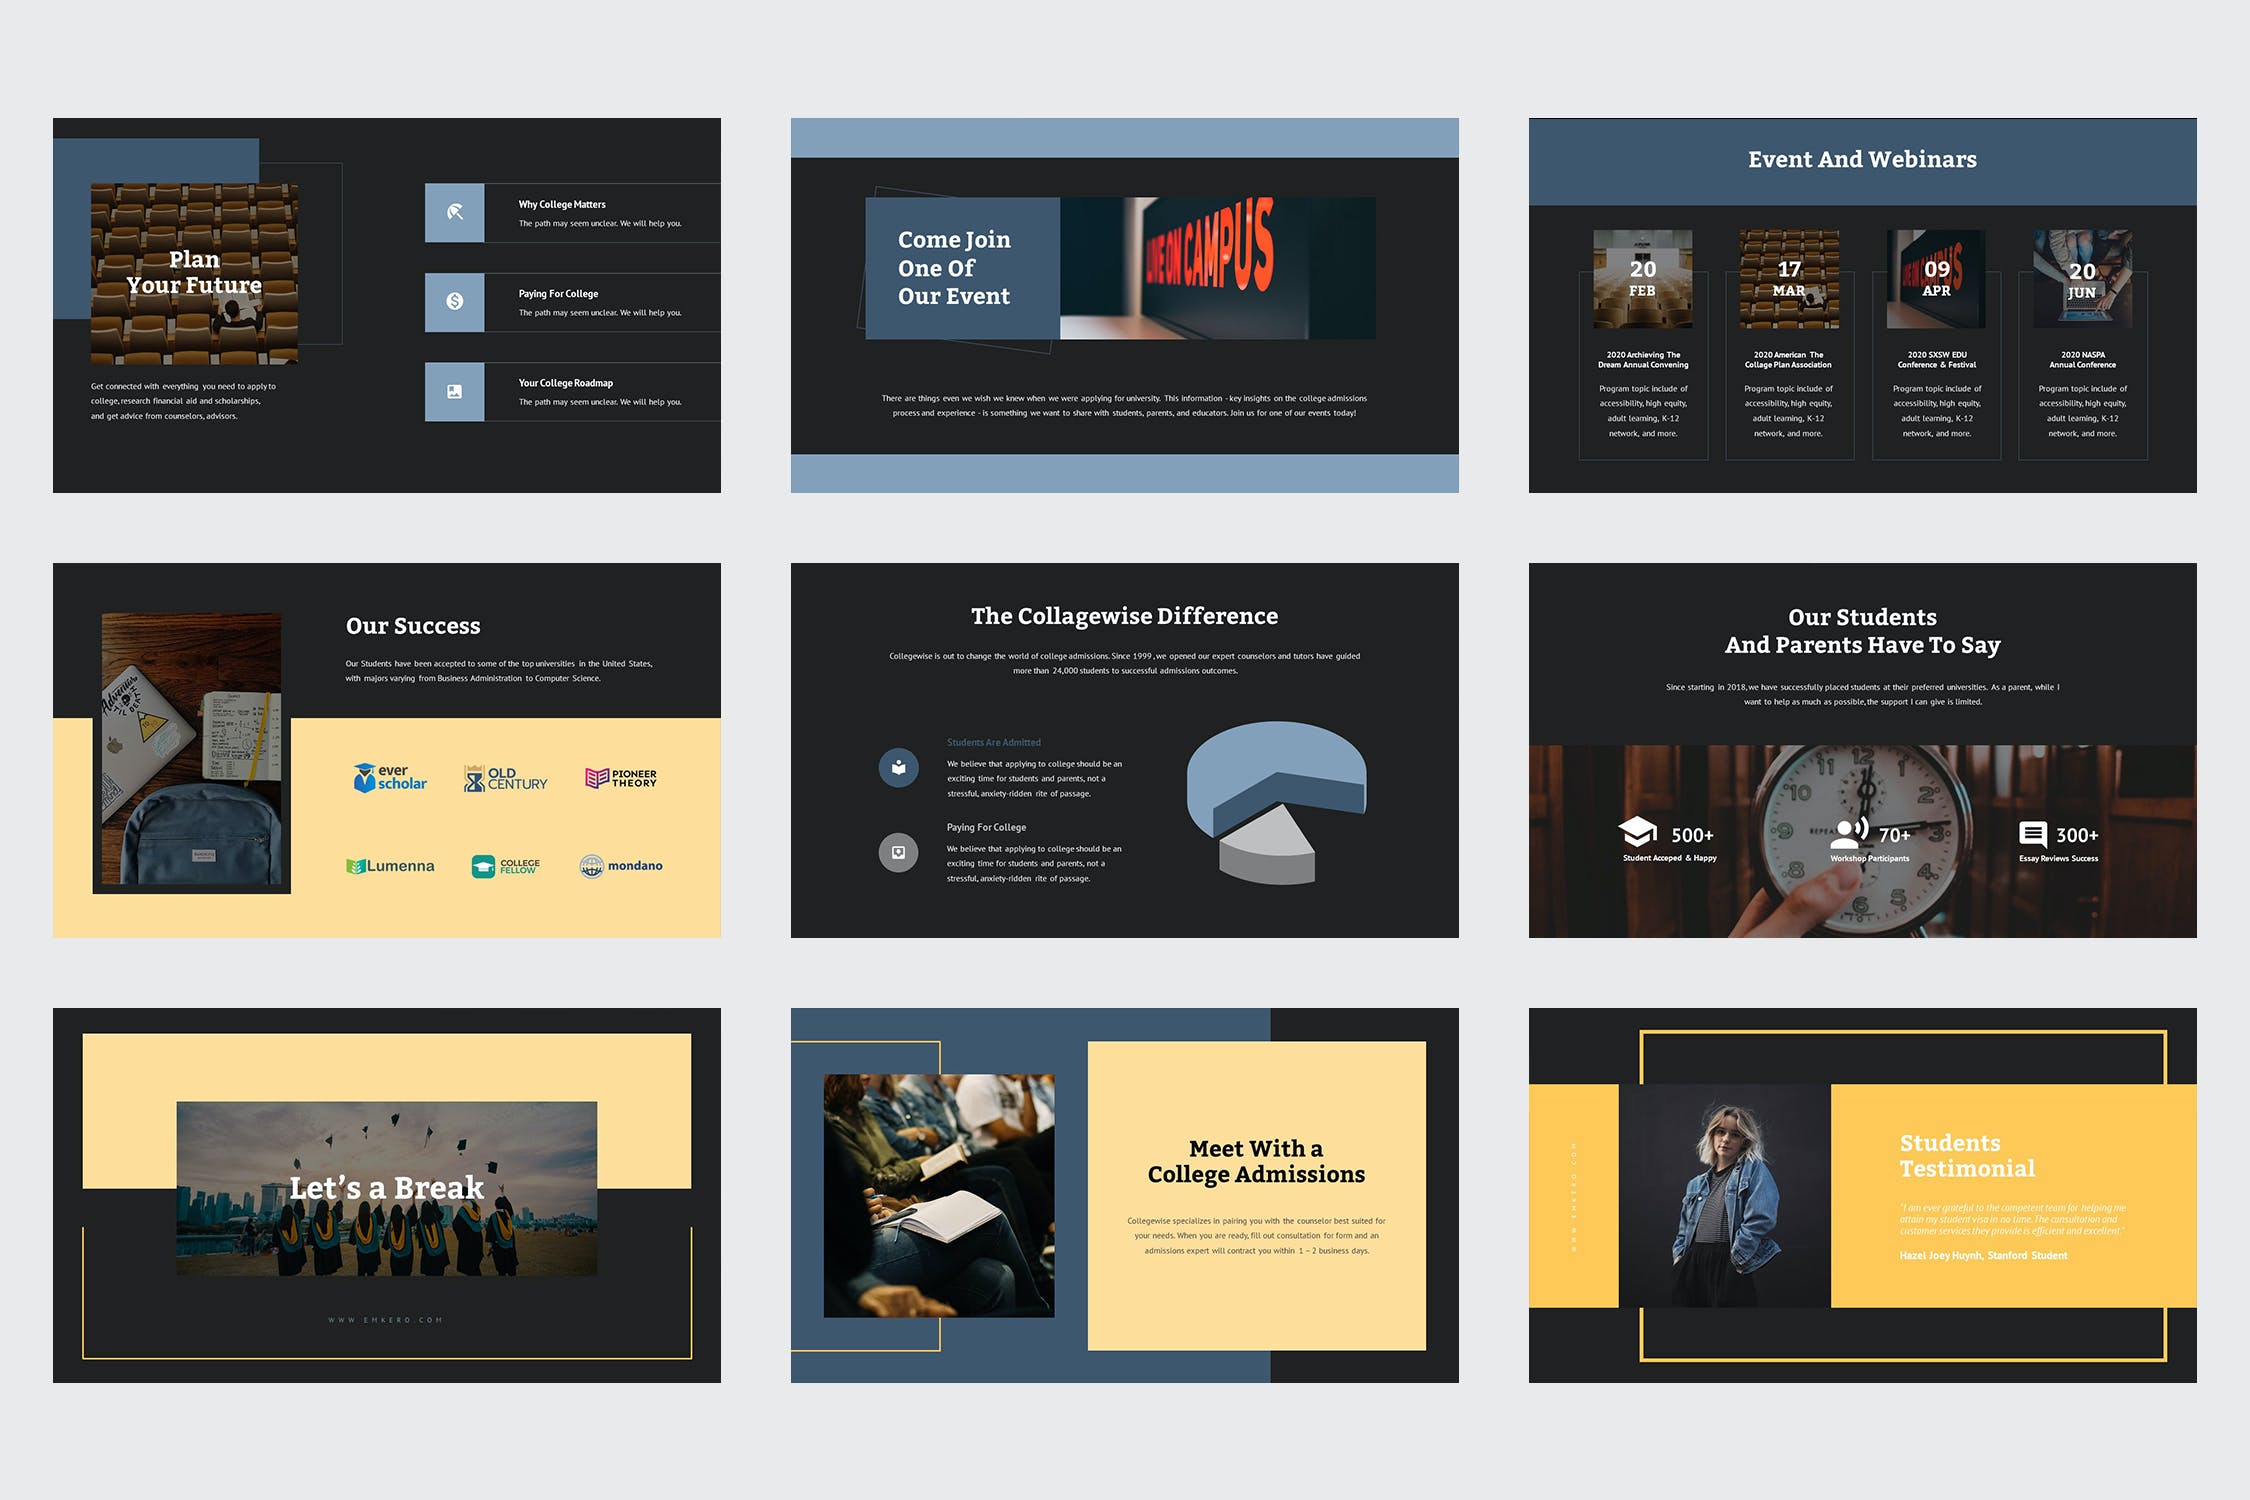 This Presentation Template contains modern, elegant, creative, professional and unique layouts.